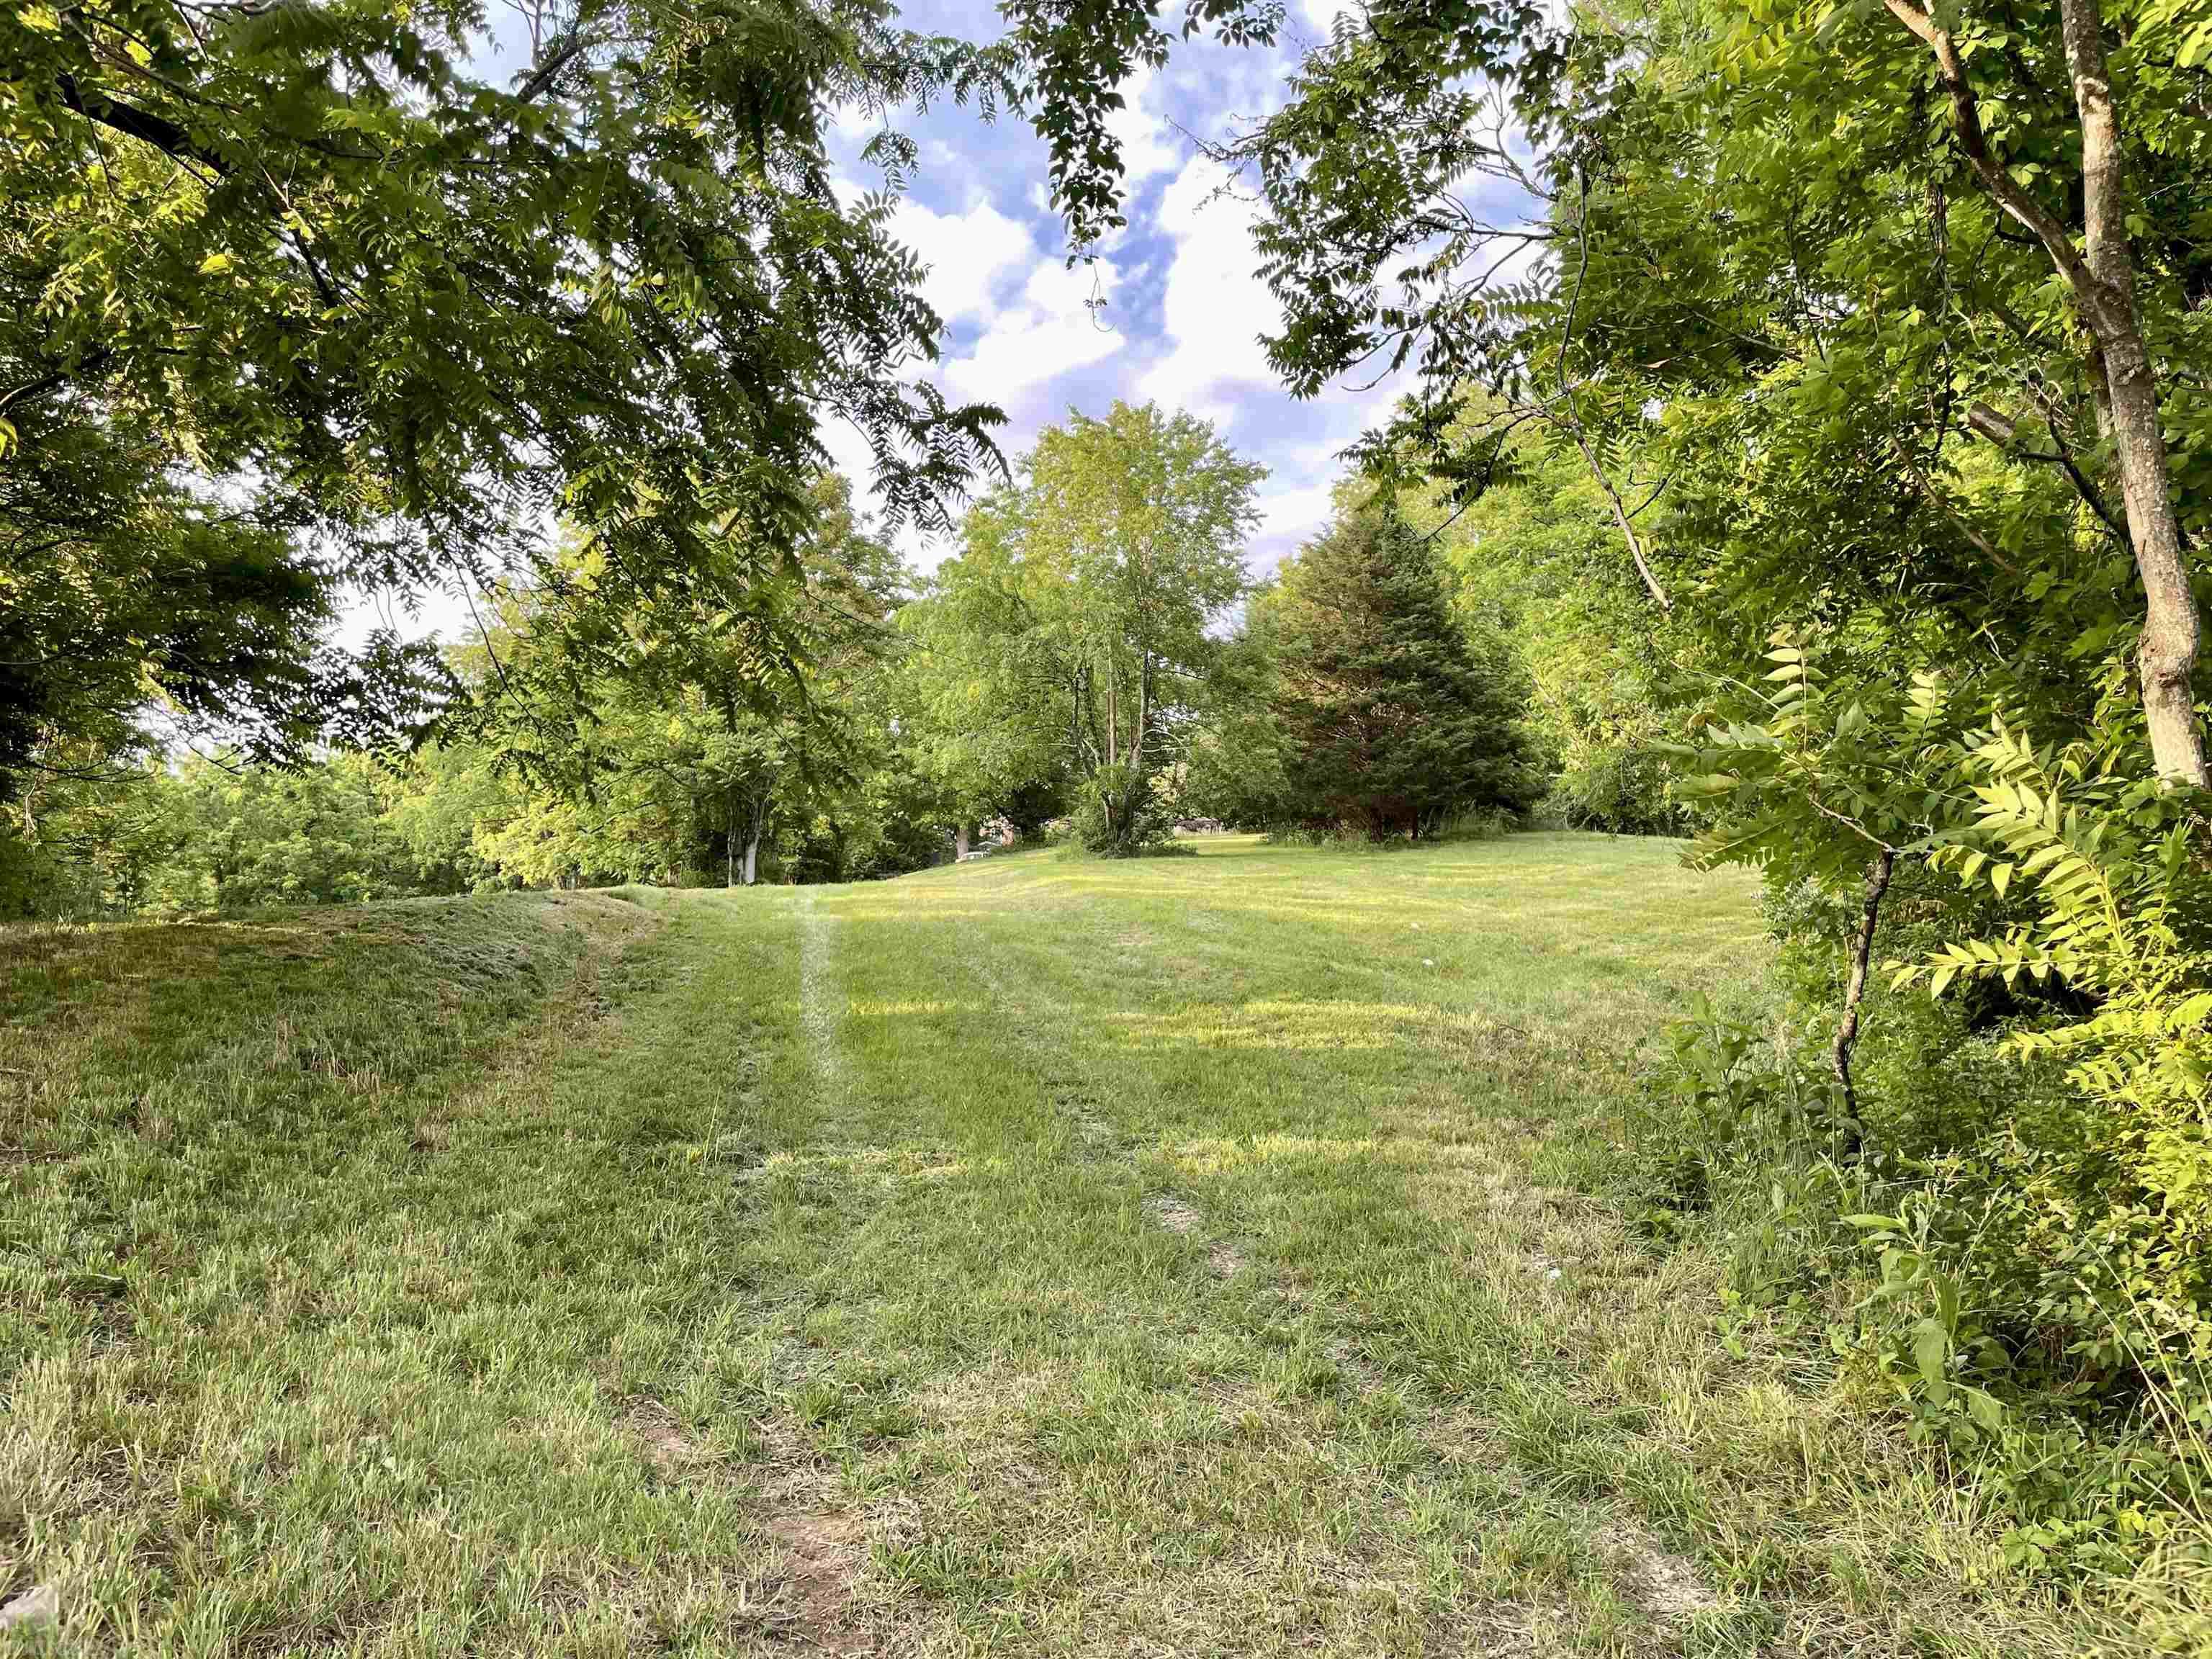 Open gently sloping land. Zoned Residential. There is a 30ft right of way going to the neighbor's home in this property. See plat under documents.